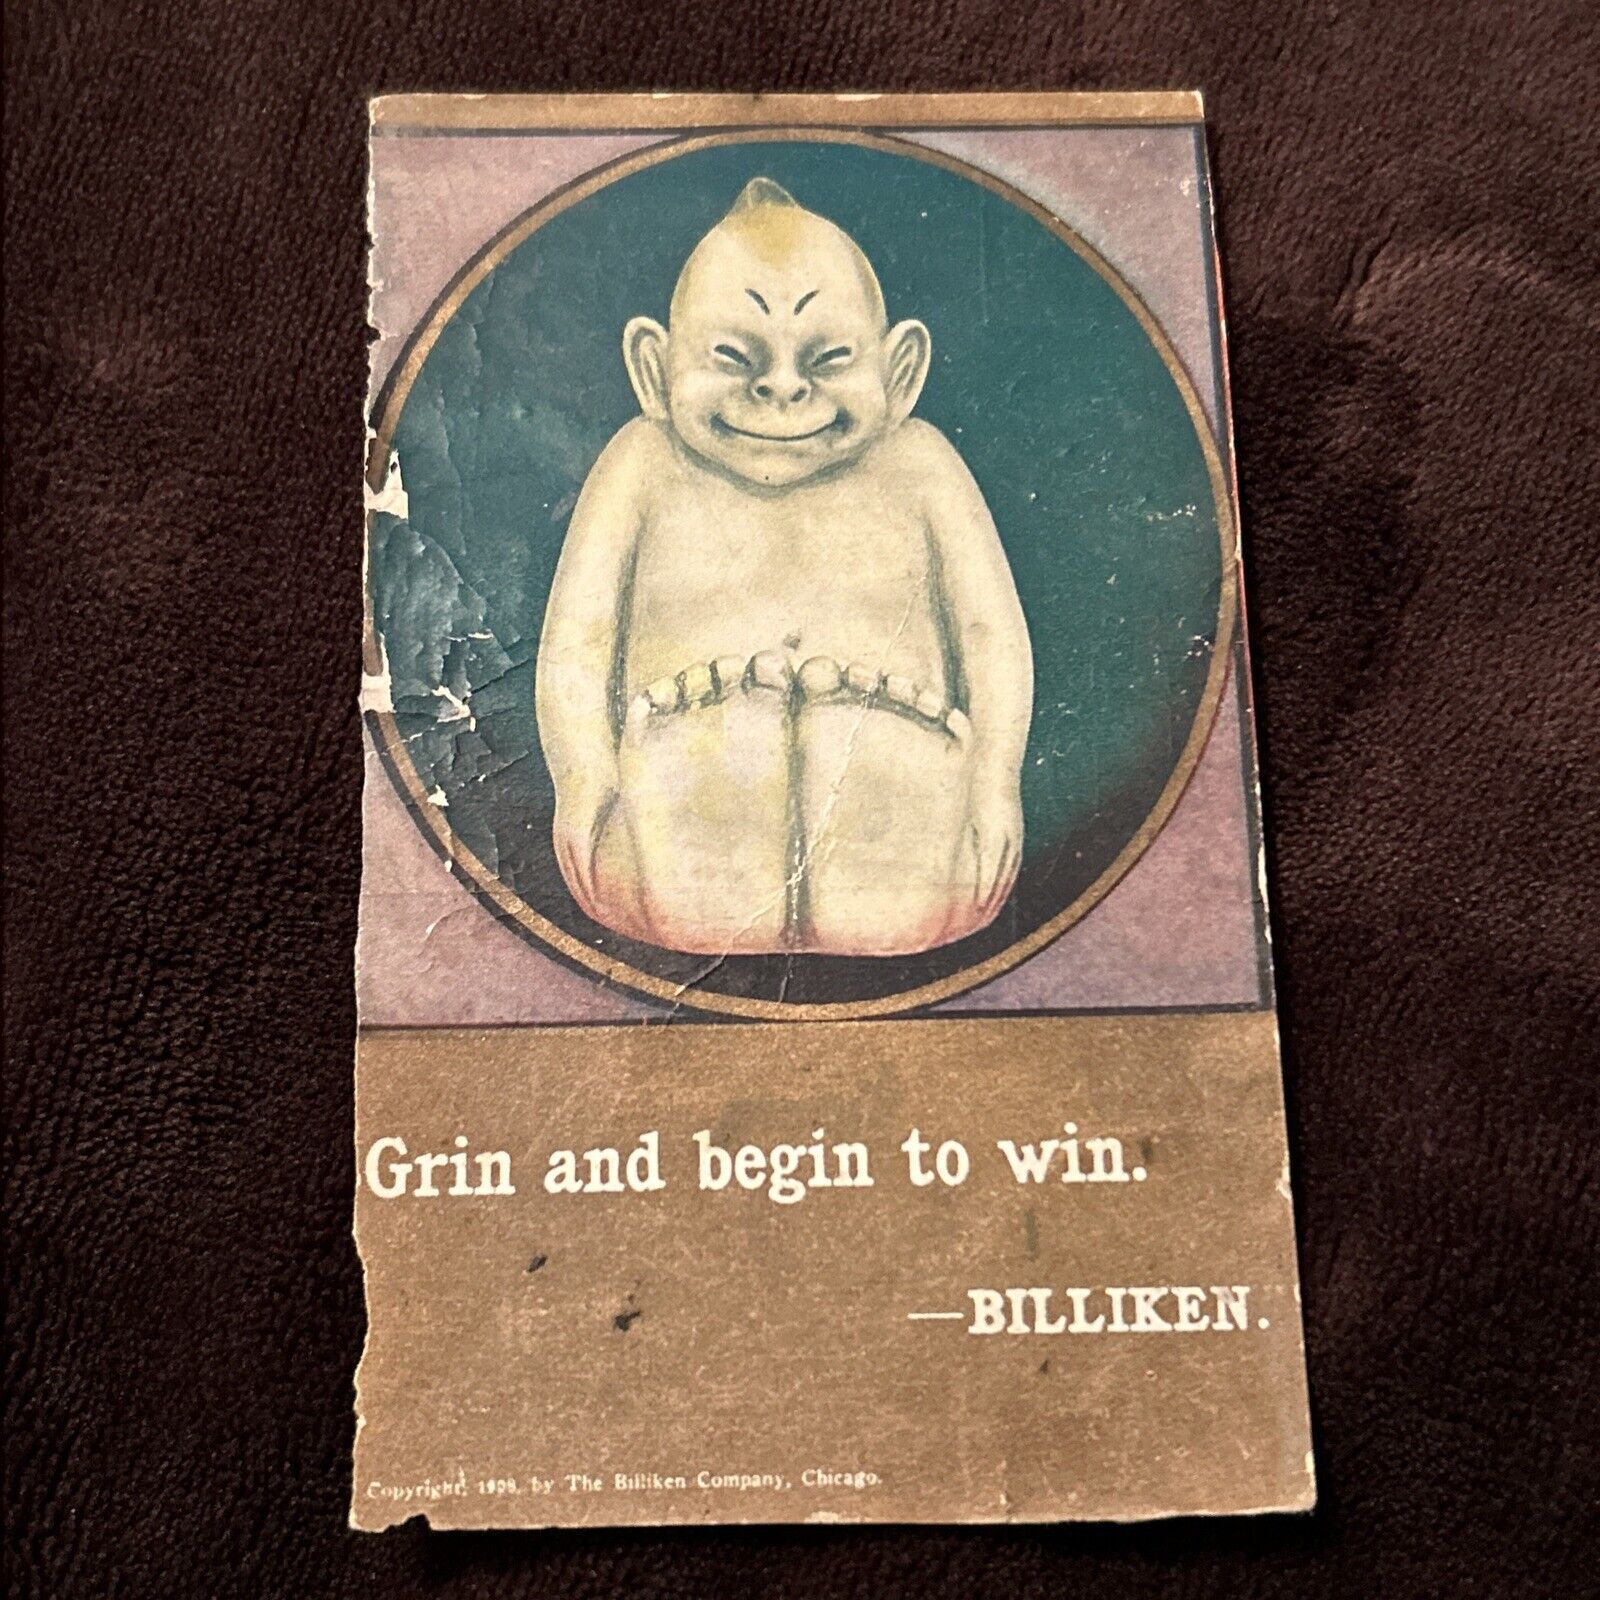 1908 BILLIKEN, GRIN AND BEGIN TO WIN, CUTE CHARM, CHICAGO UNUSED Postcard